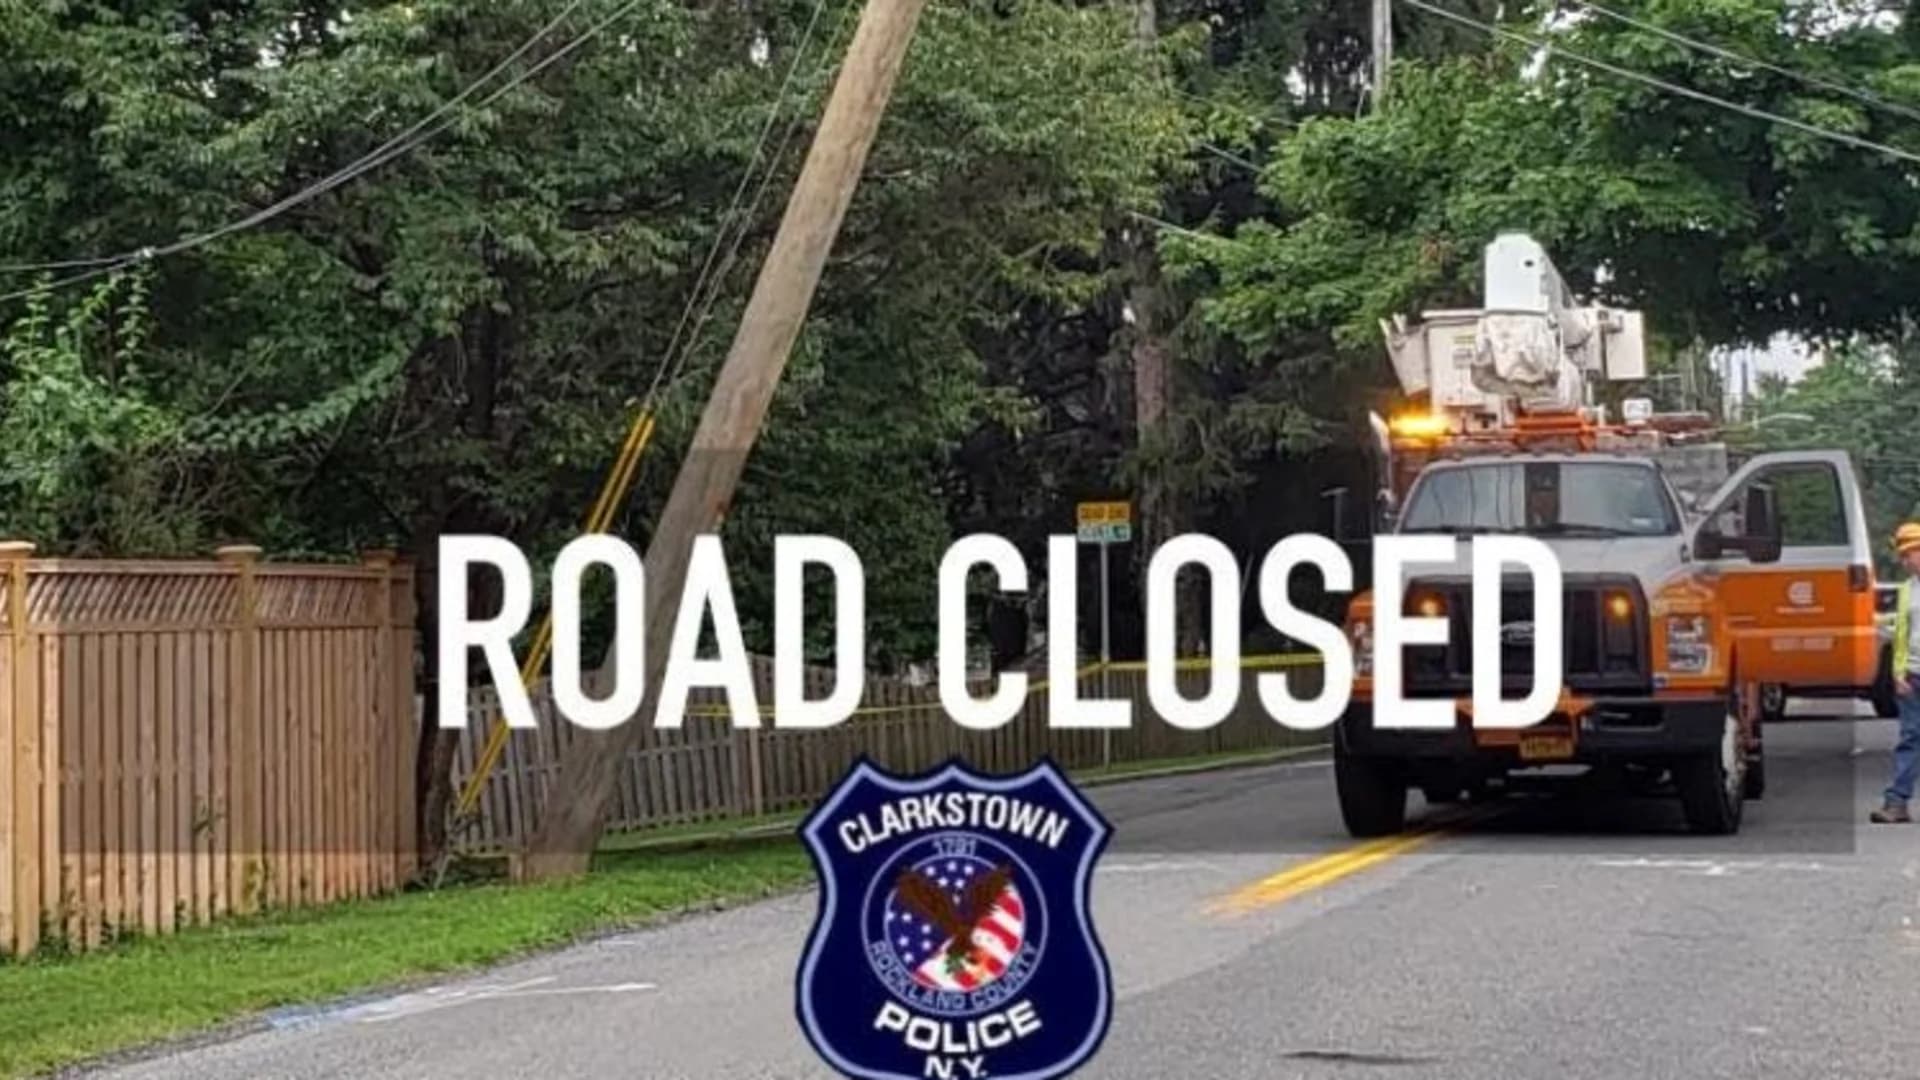 Clarkstown PD close road after truck hits low wire, power near area may be affected